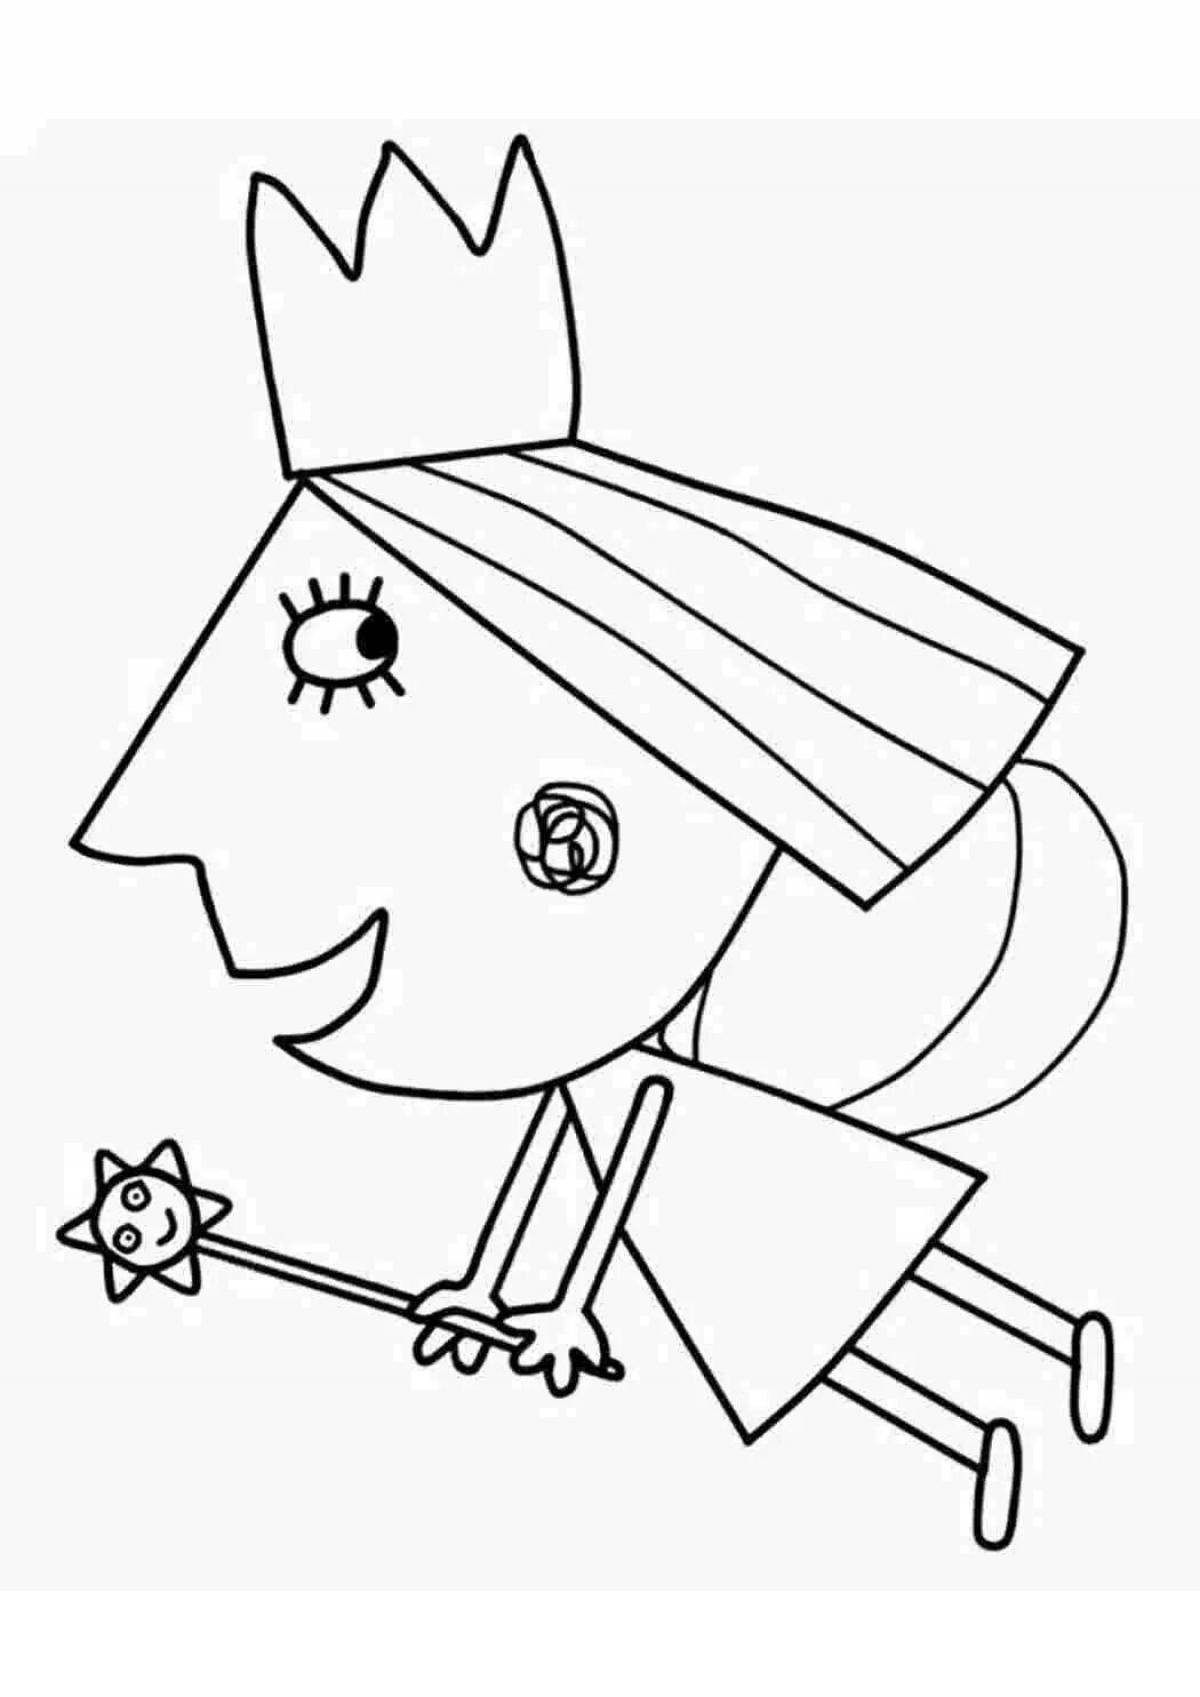 Benny's playful coloring page